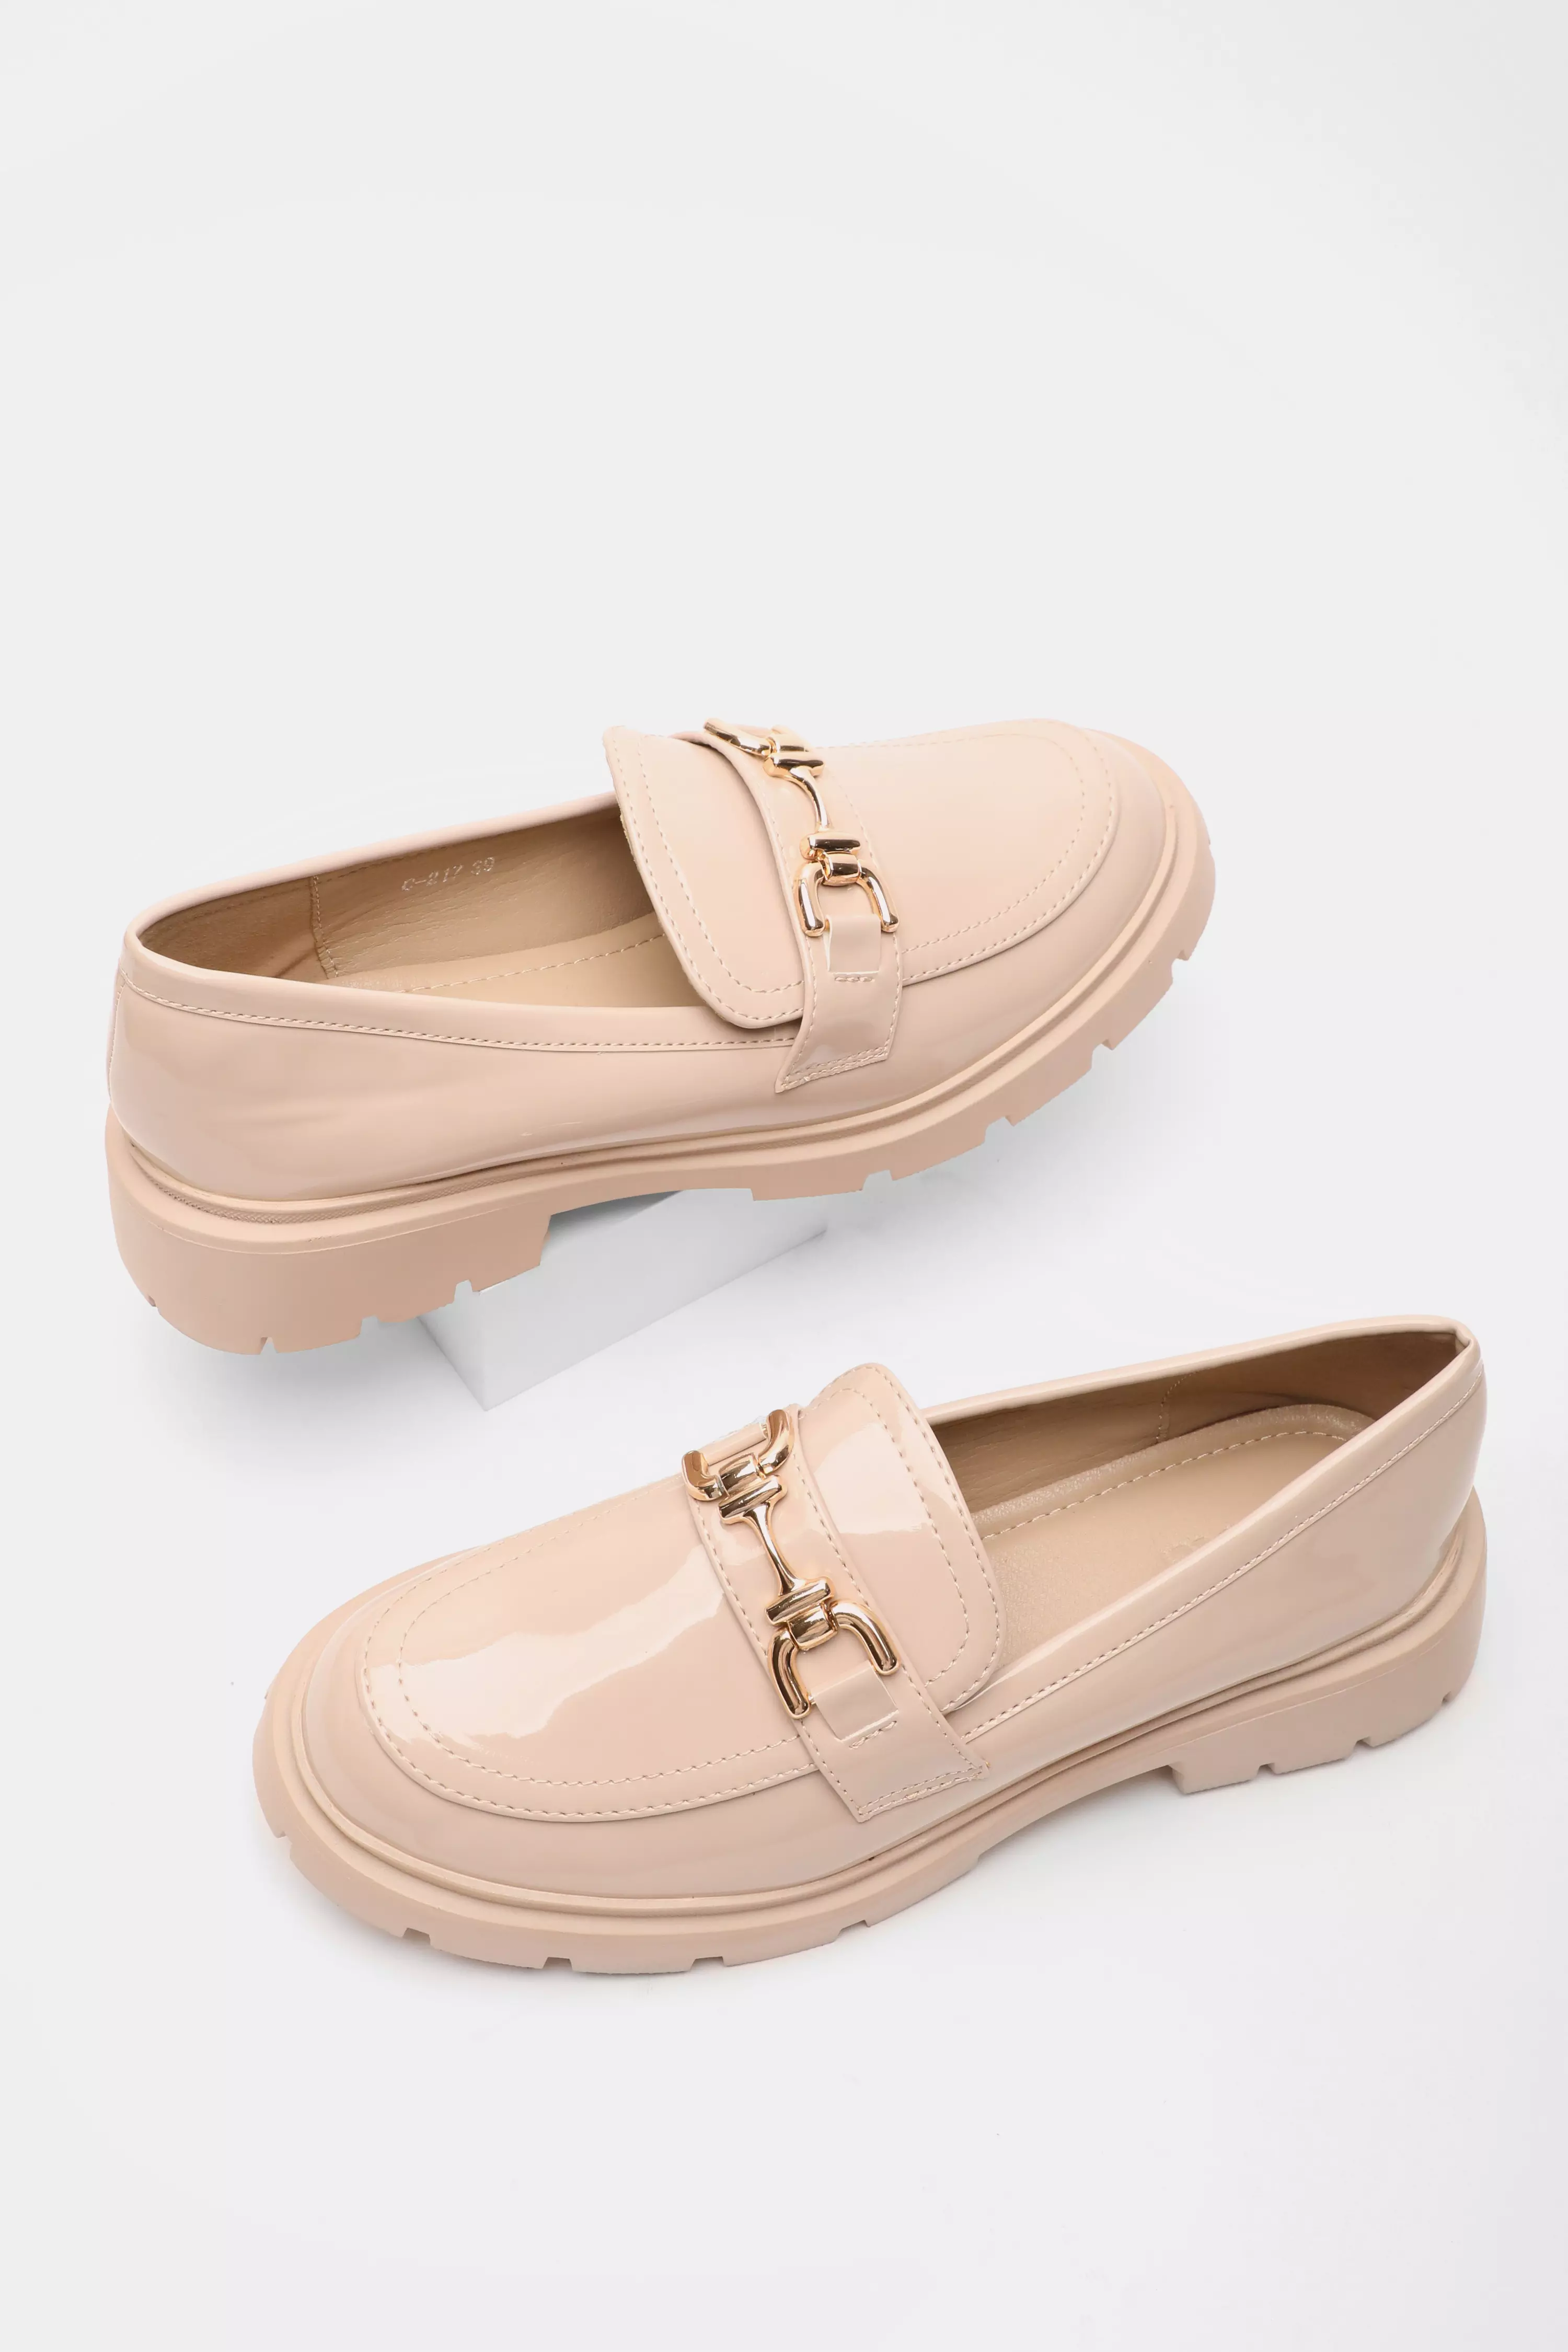 Nude Faux Leather Chunky Loafer